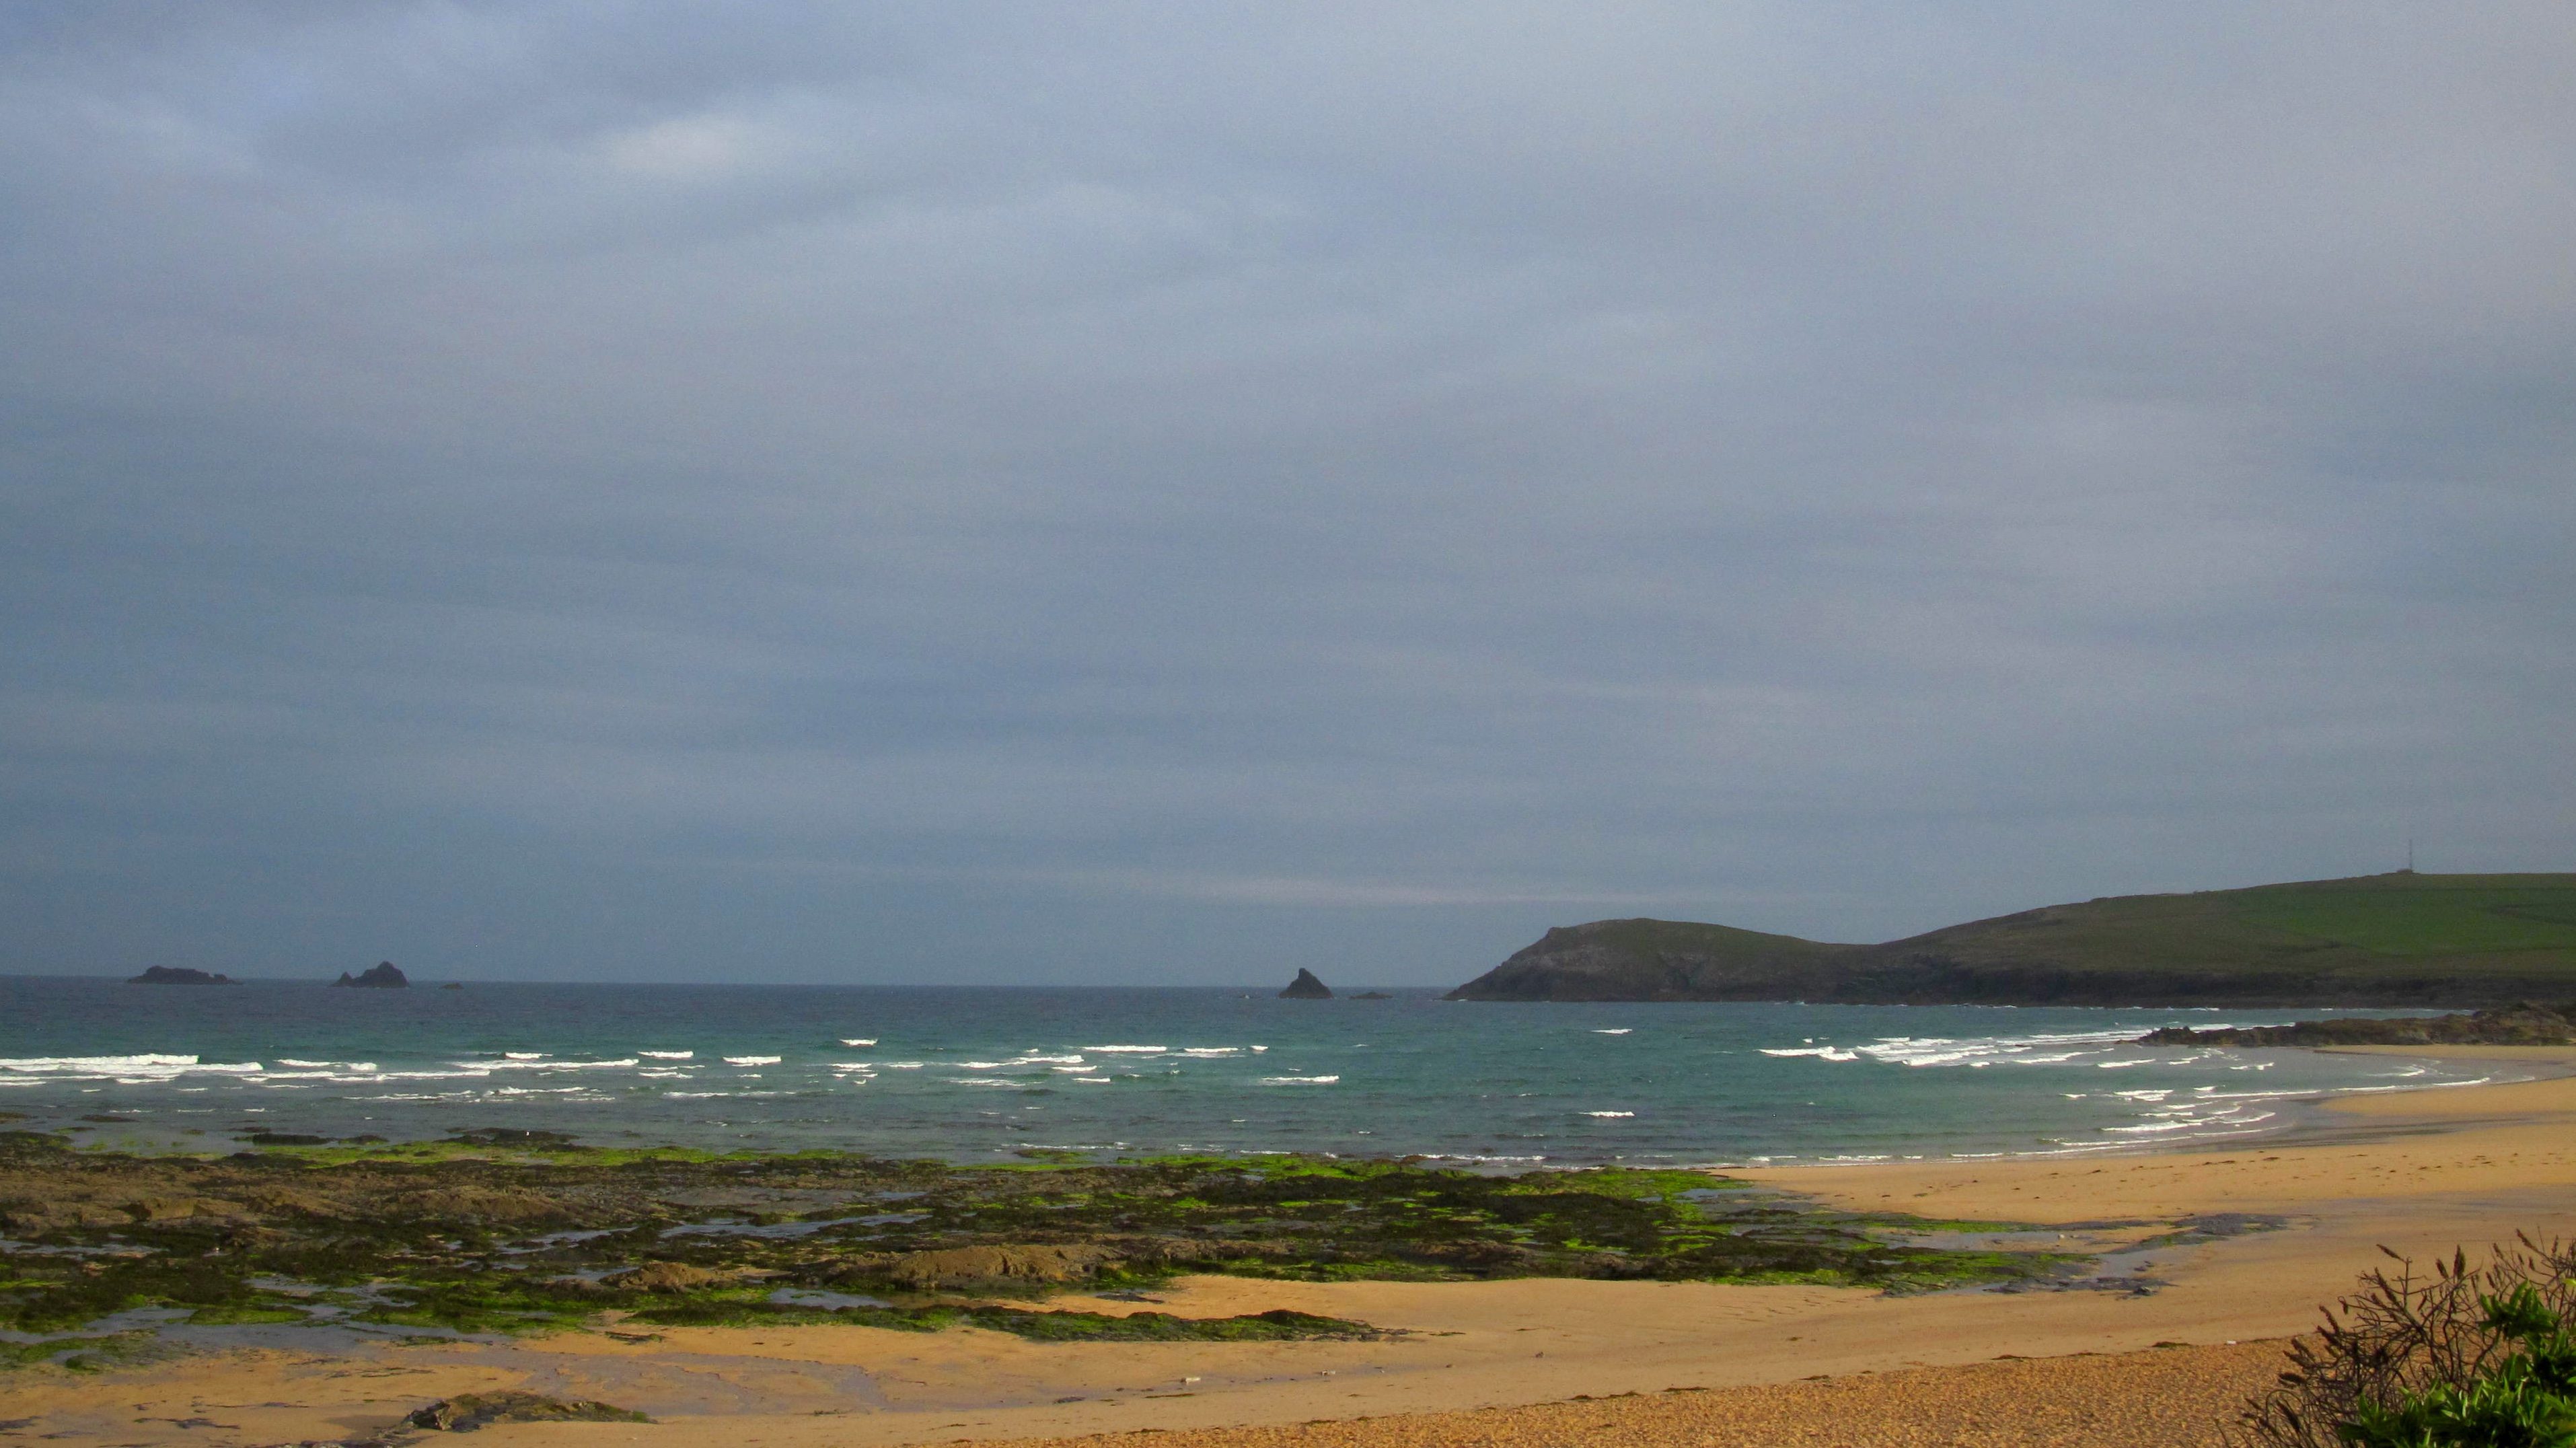 Surf Report for Holiday Monday 25th May 2015